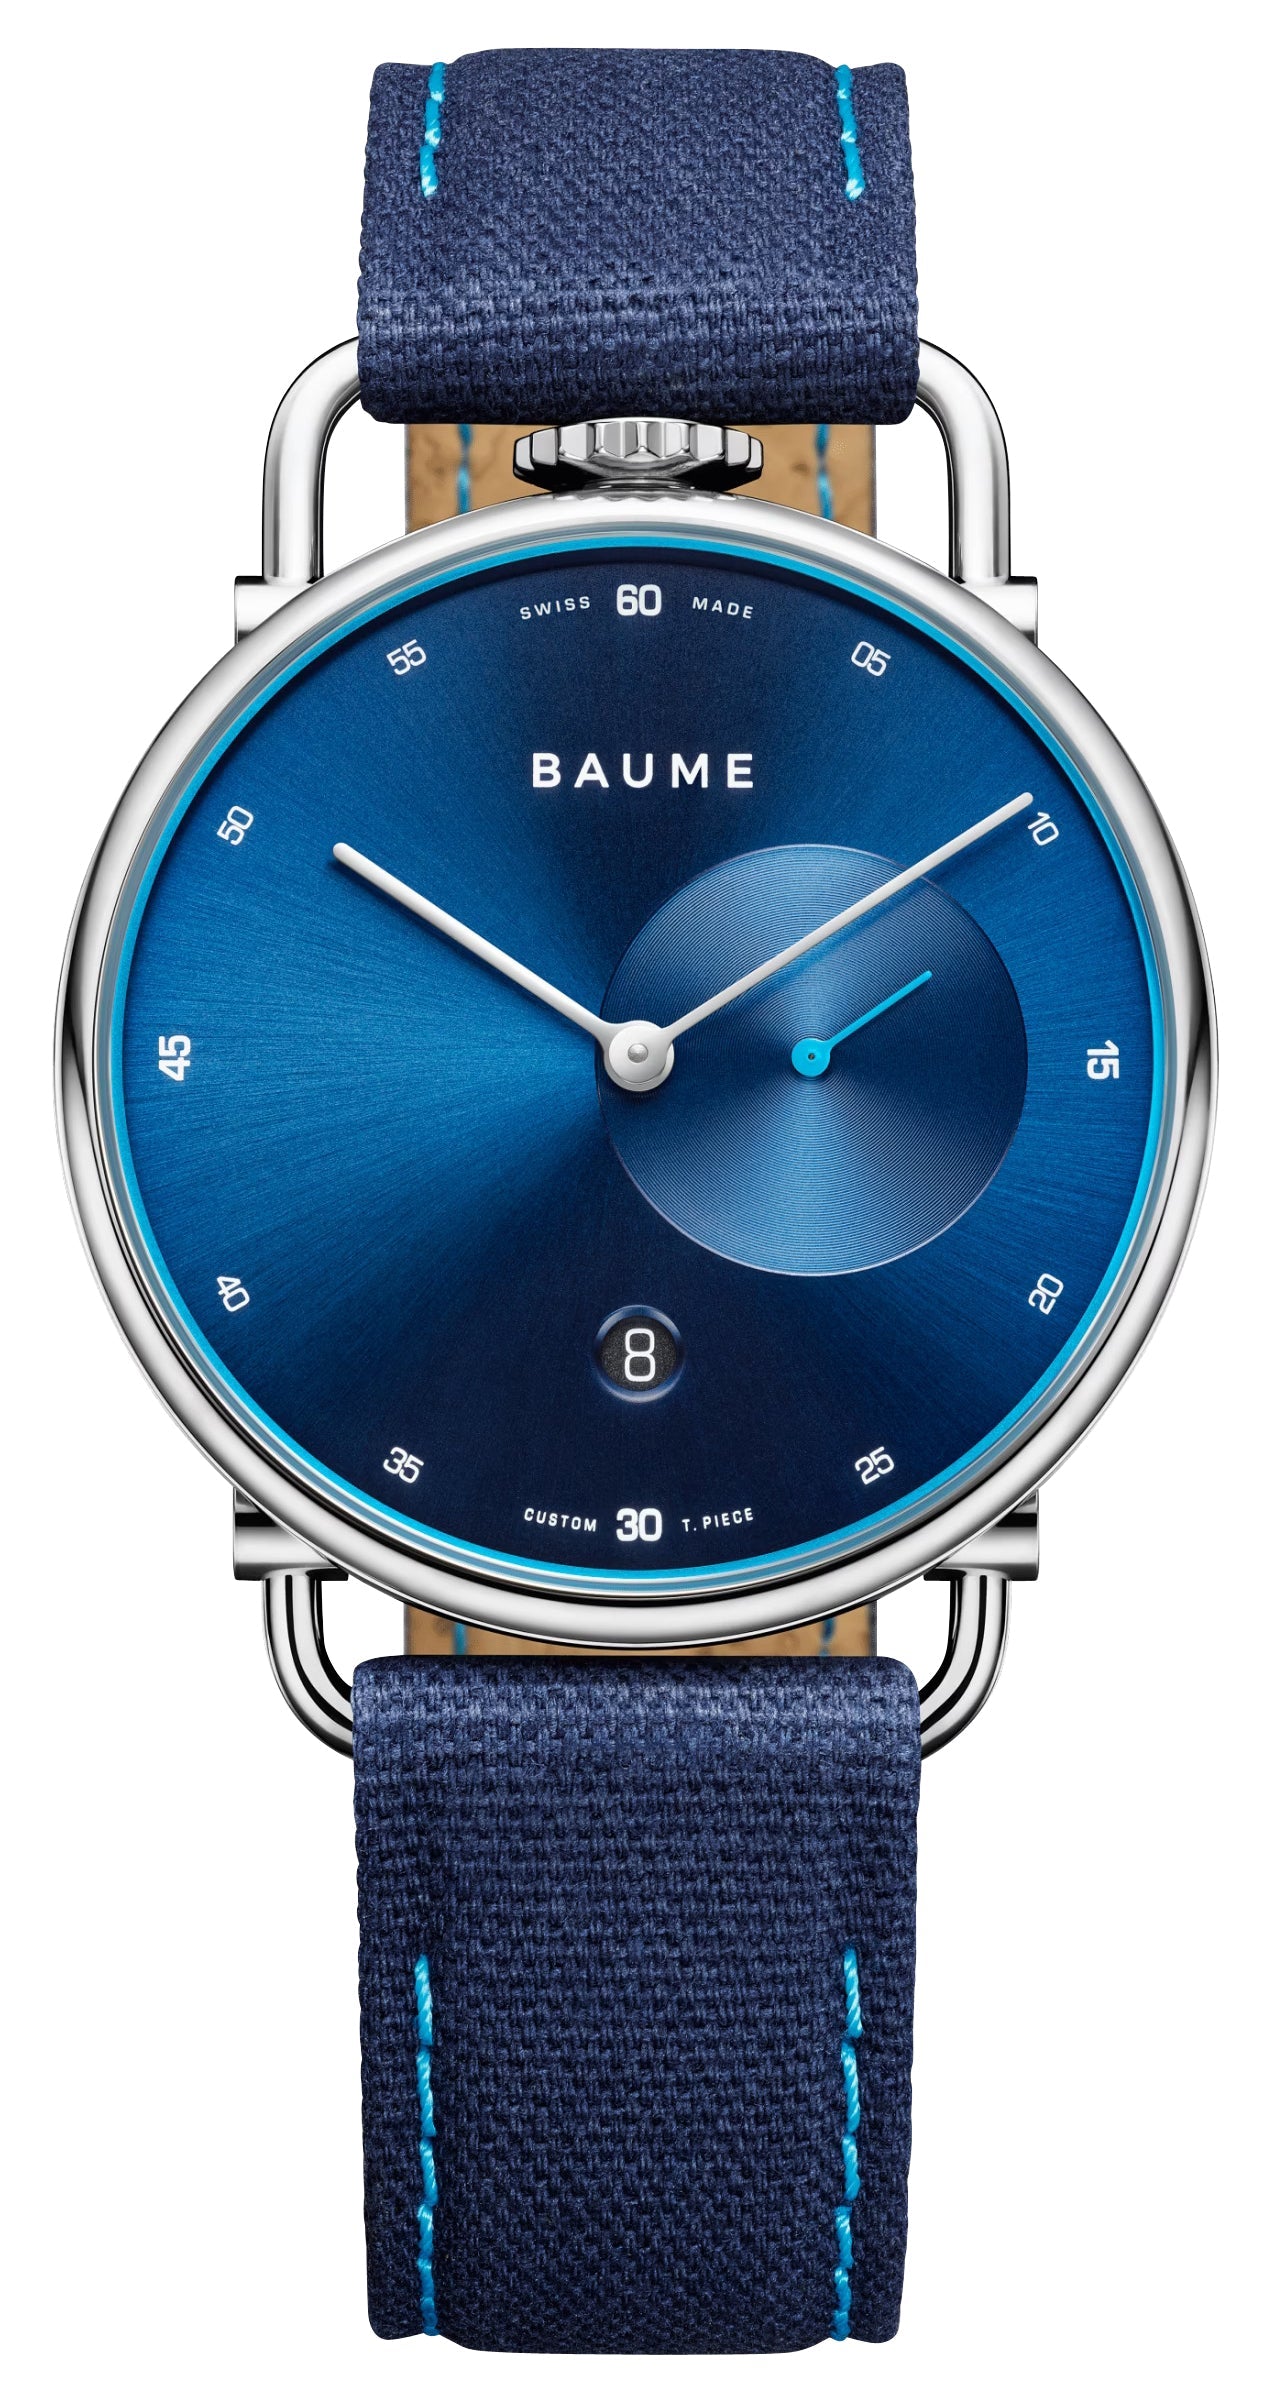 update alt-text with template Watches - Mens-Baume & Mercier-M0A10601-40 - 45 mm, Baume, Baume & Mercier, blue, date, fabric, mens, menswatches, new arrivals, round, rpSKU_241763.1, rpSKU_M0A10355, rpSKU_M0A10600, rpSKU_M0A10603, rpSKU_M0A10687, seconds sub-dial, stainless steel case, swiss quartz, watches-Watches & Beyond